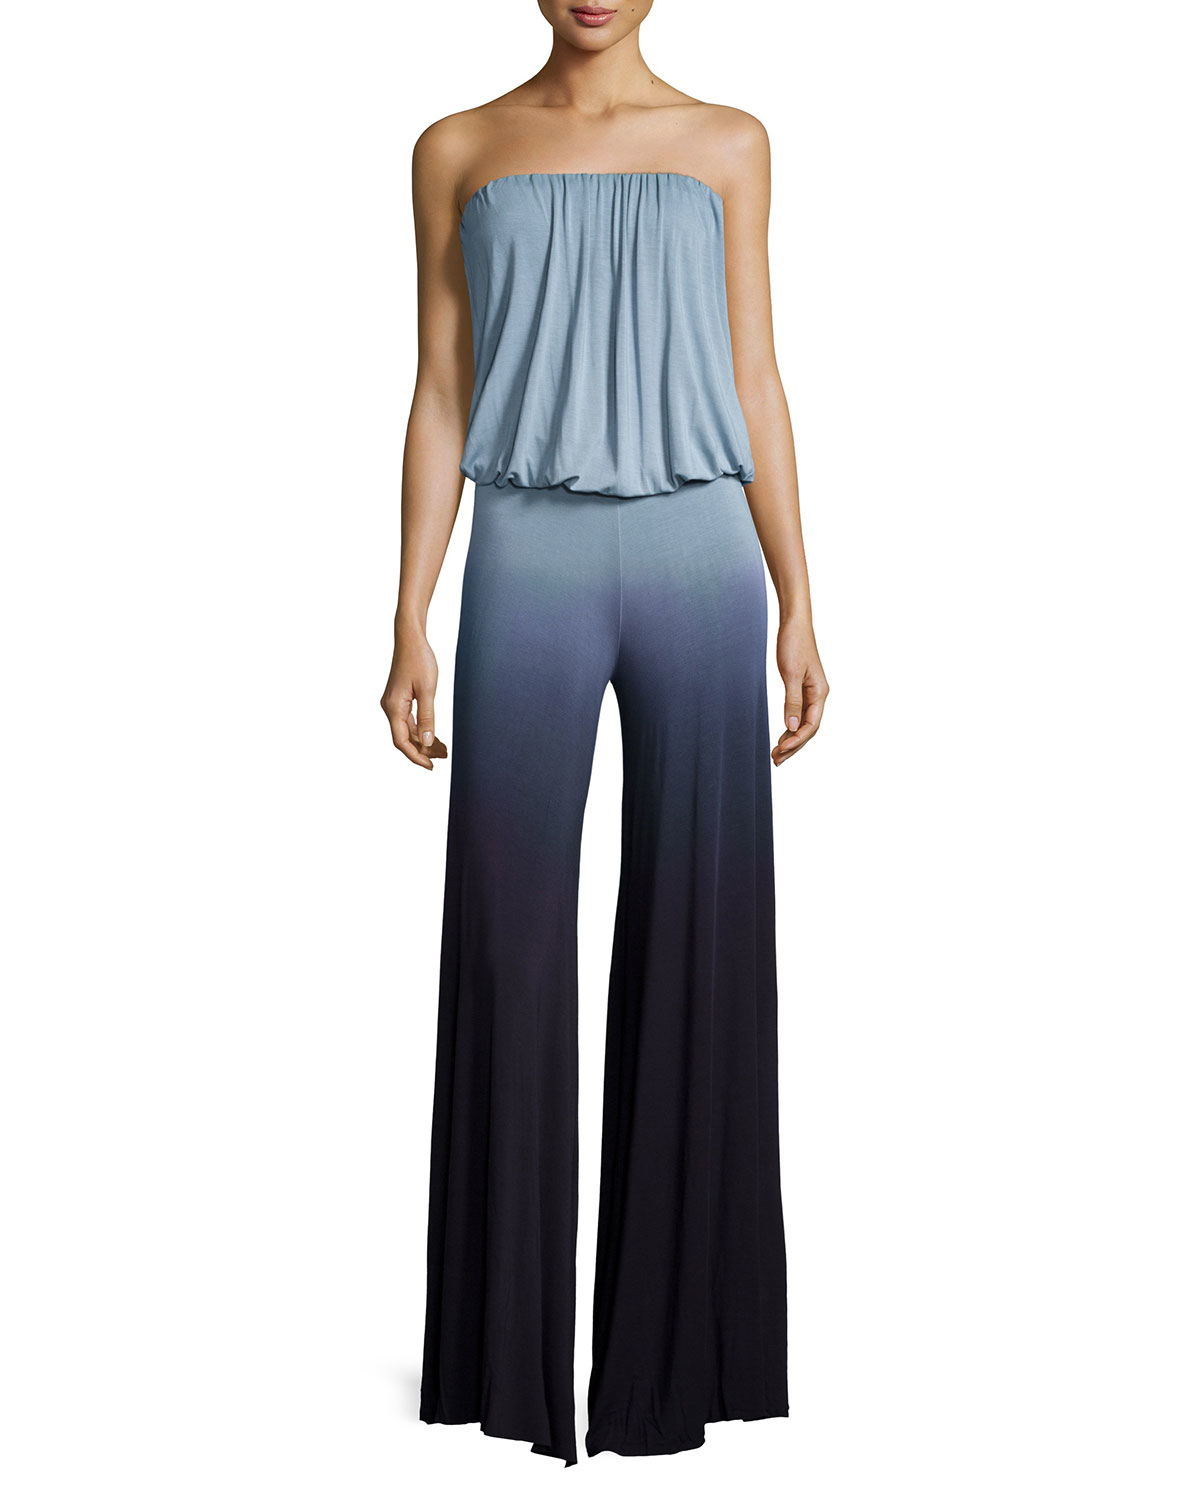 Young Fabulous & Broke Sydney Ombre Strapless Jumpsuit in Gray ...